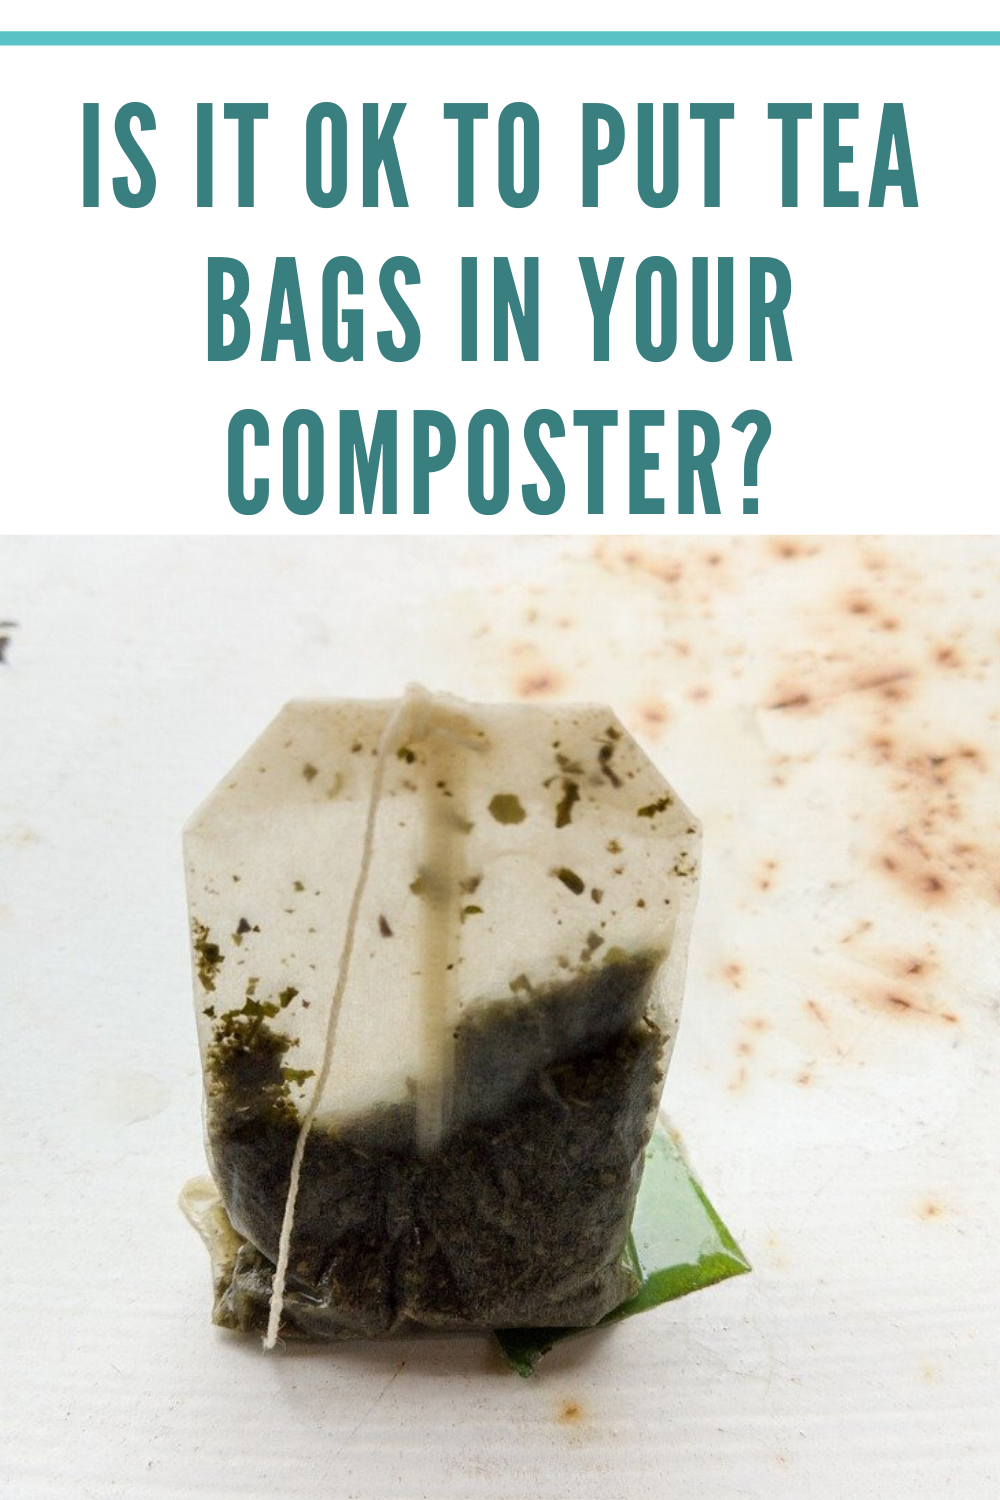 Can you compost tea bags?